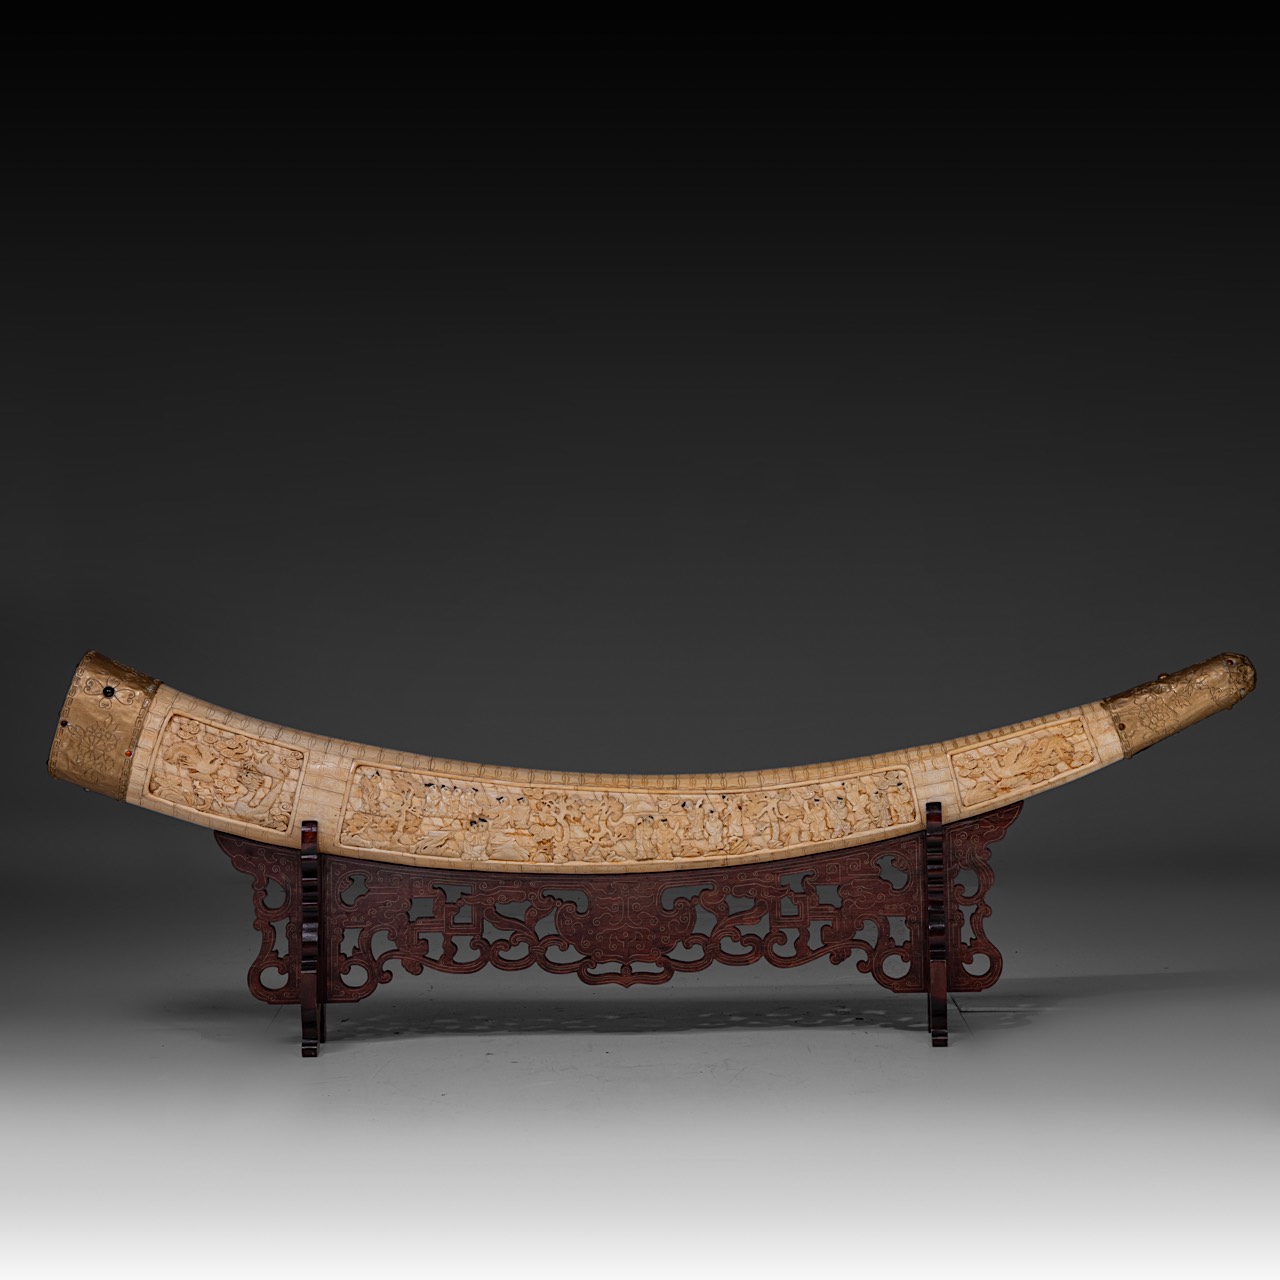 Tusk made from sculpted bone slats, Qing/Republic period, inner arch 165 cm - outer arch 175 cm - Image 3 of 13